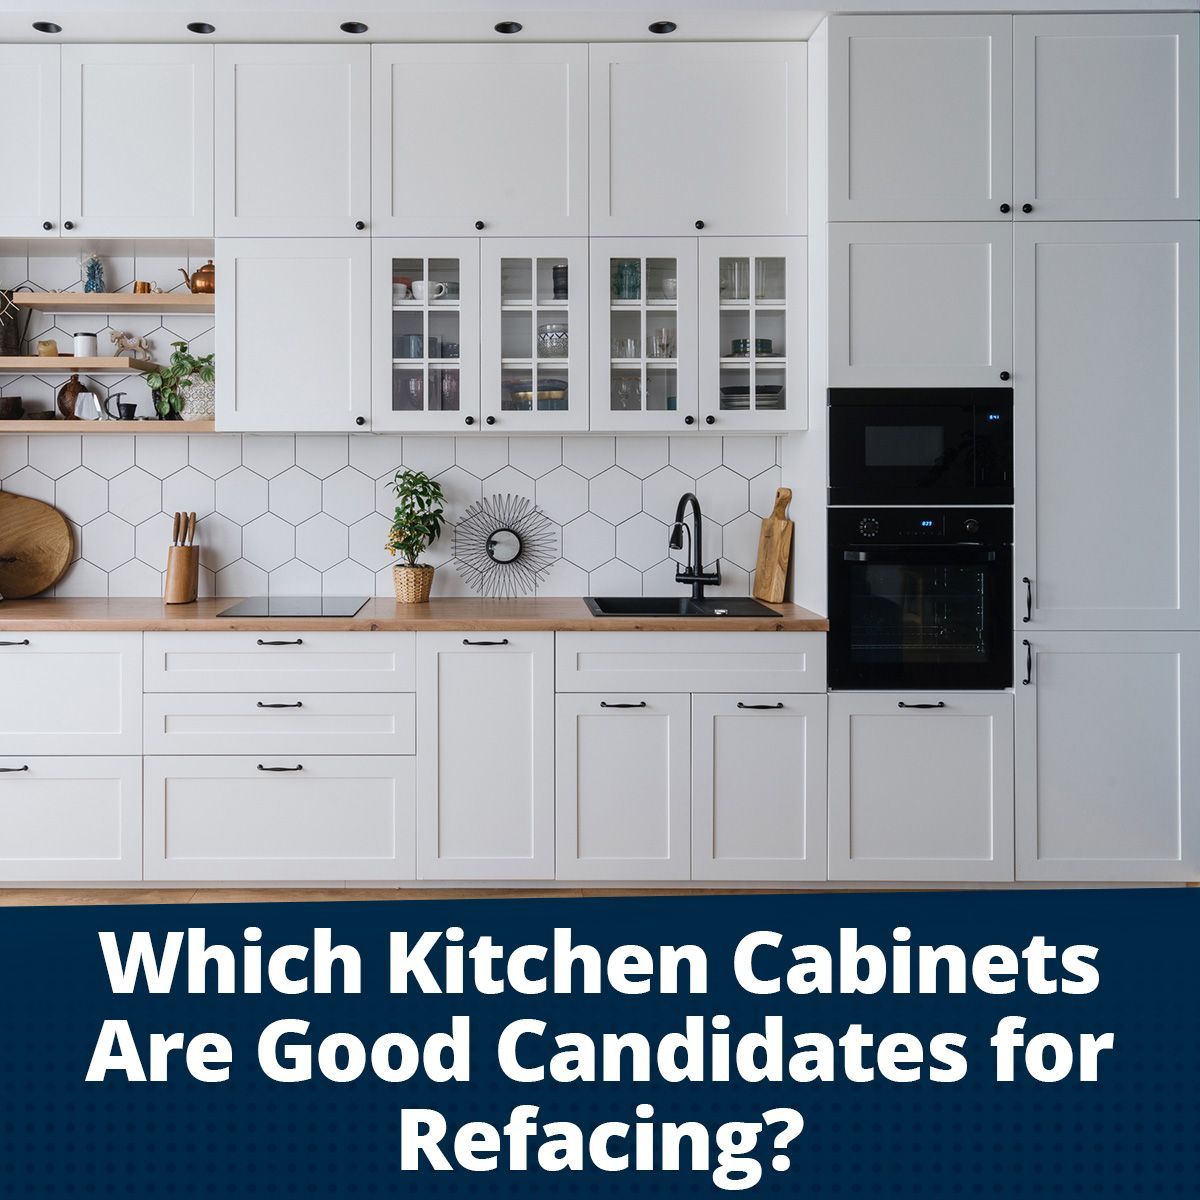 Which Kitchen Cabinets Are Good Candidates for Refacing?